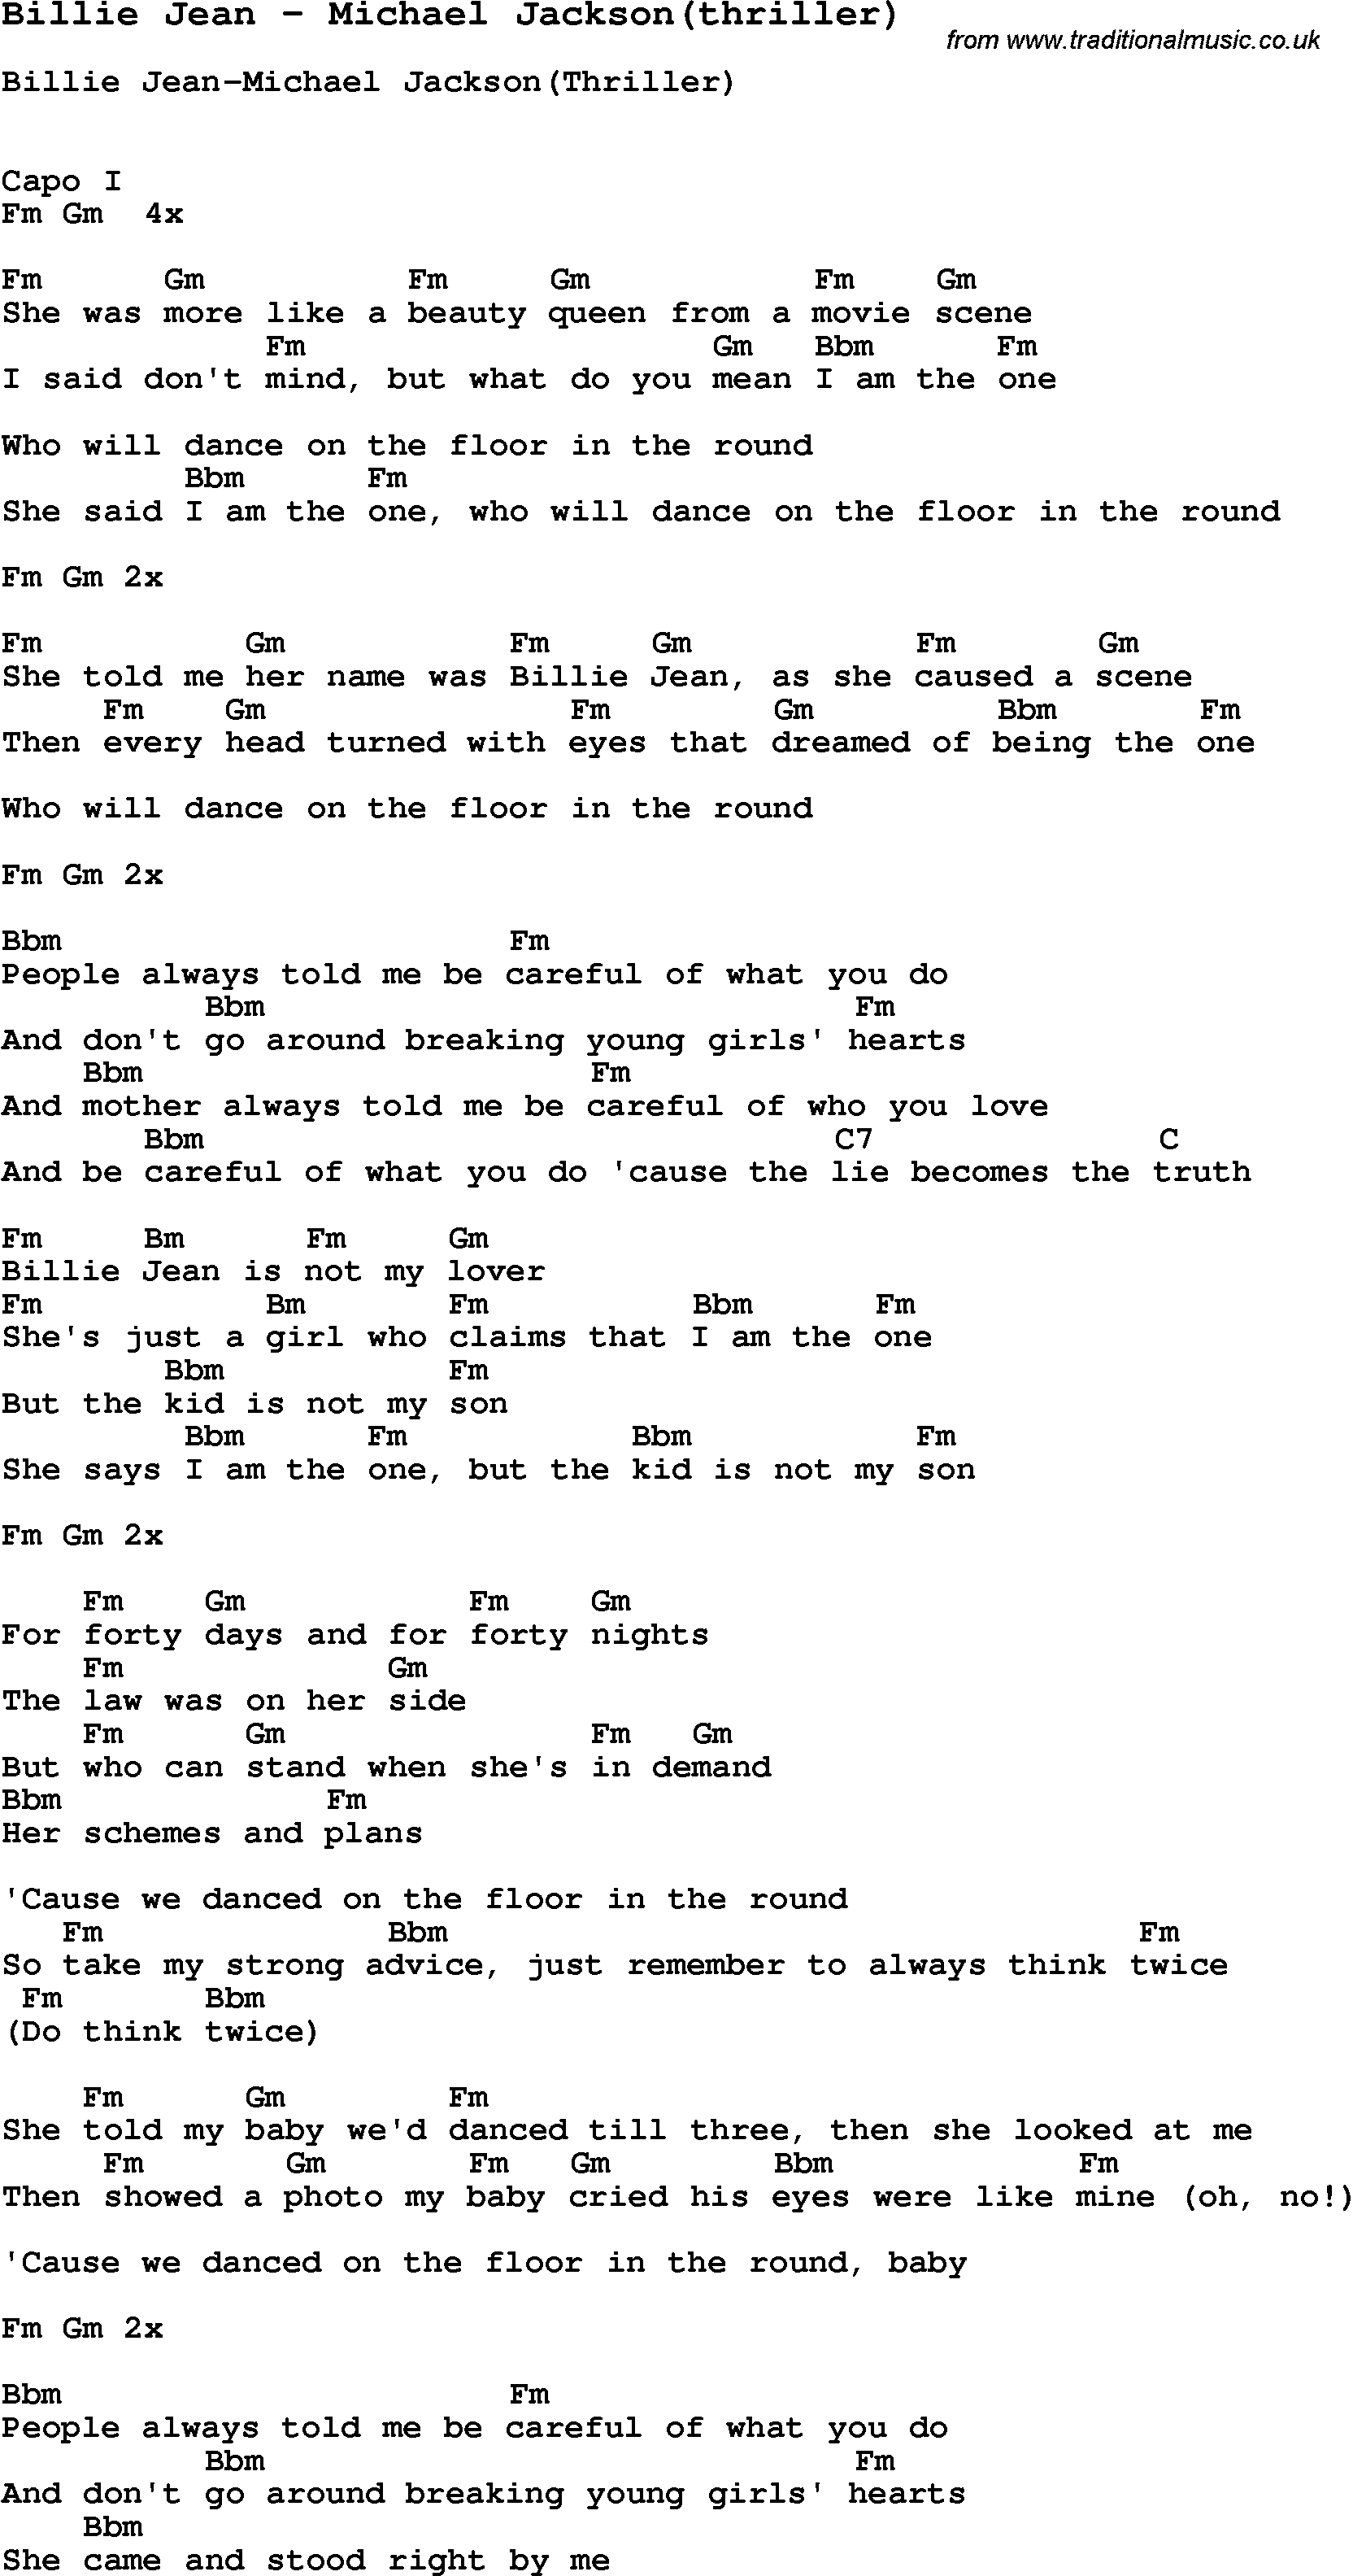 Song Billie Jean by Michael Jackson(thriller), with lyrics for vocal performance and accompaniment chords for Ukulele, Guitar Banjo etc.